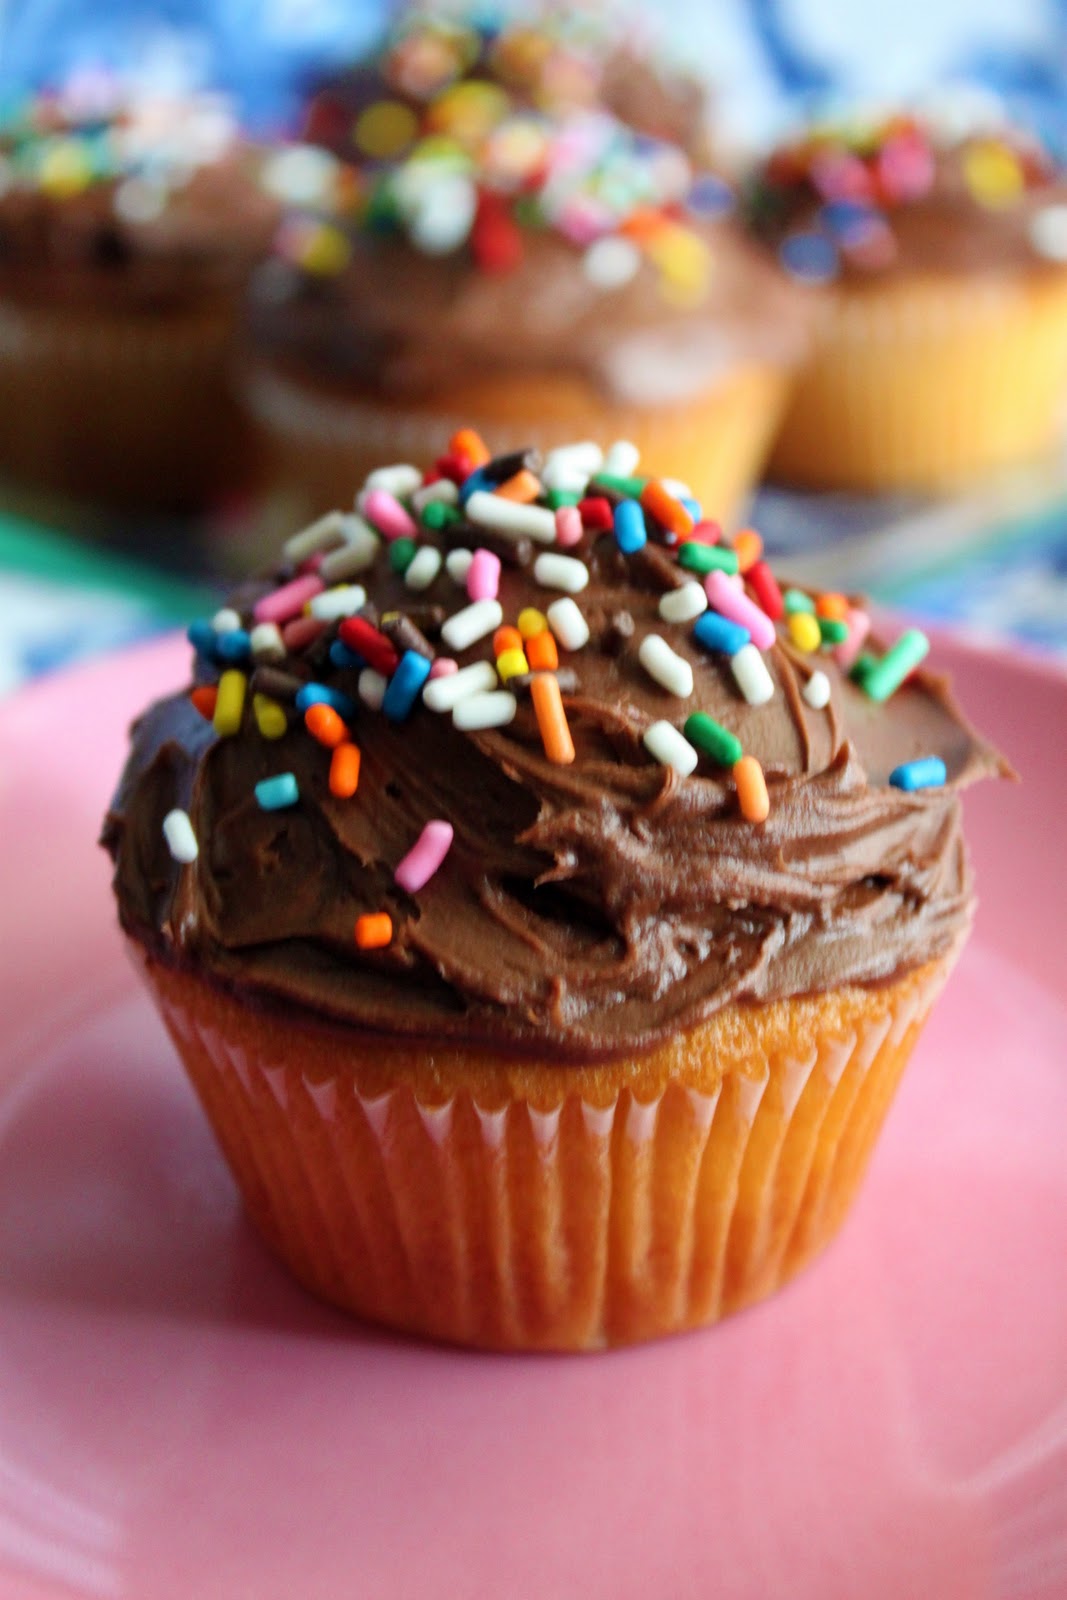 Clutzy Cooking: The Best/Easiest/Best Cupcakes Ever. EVER.